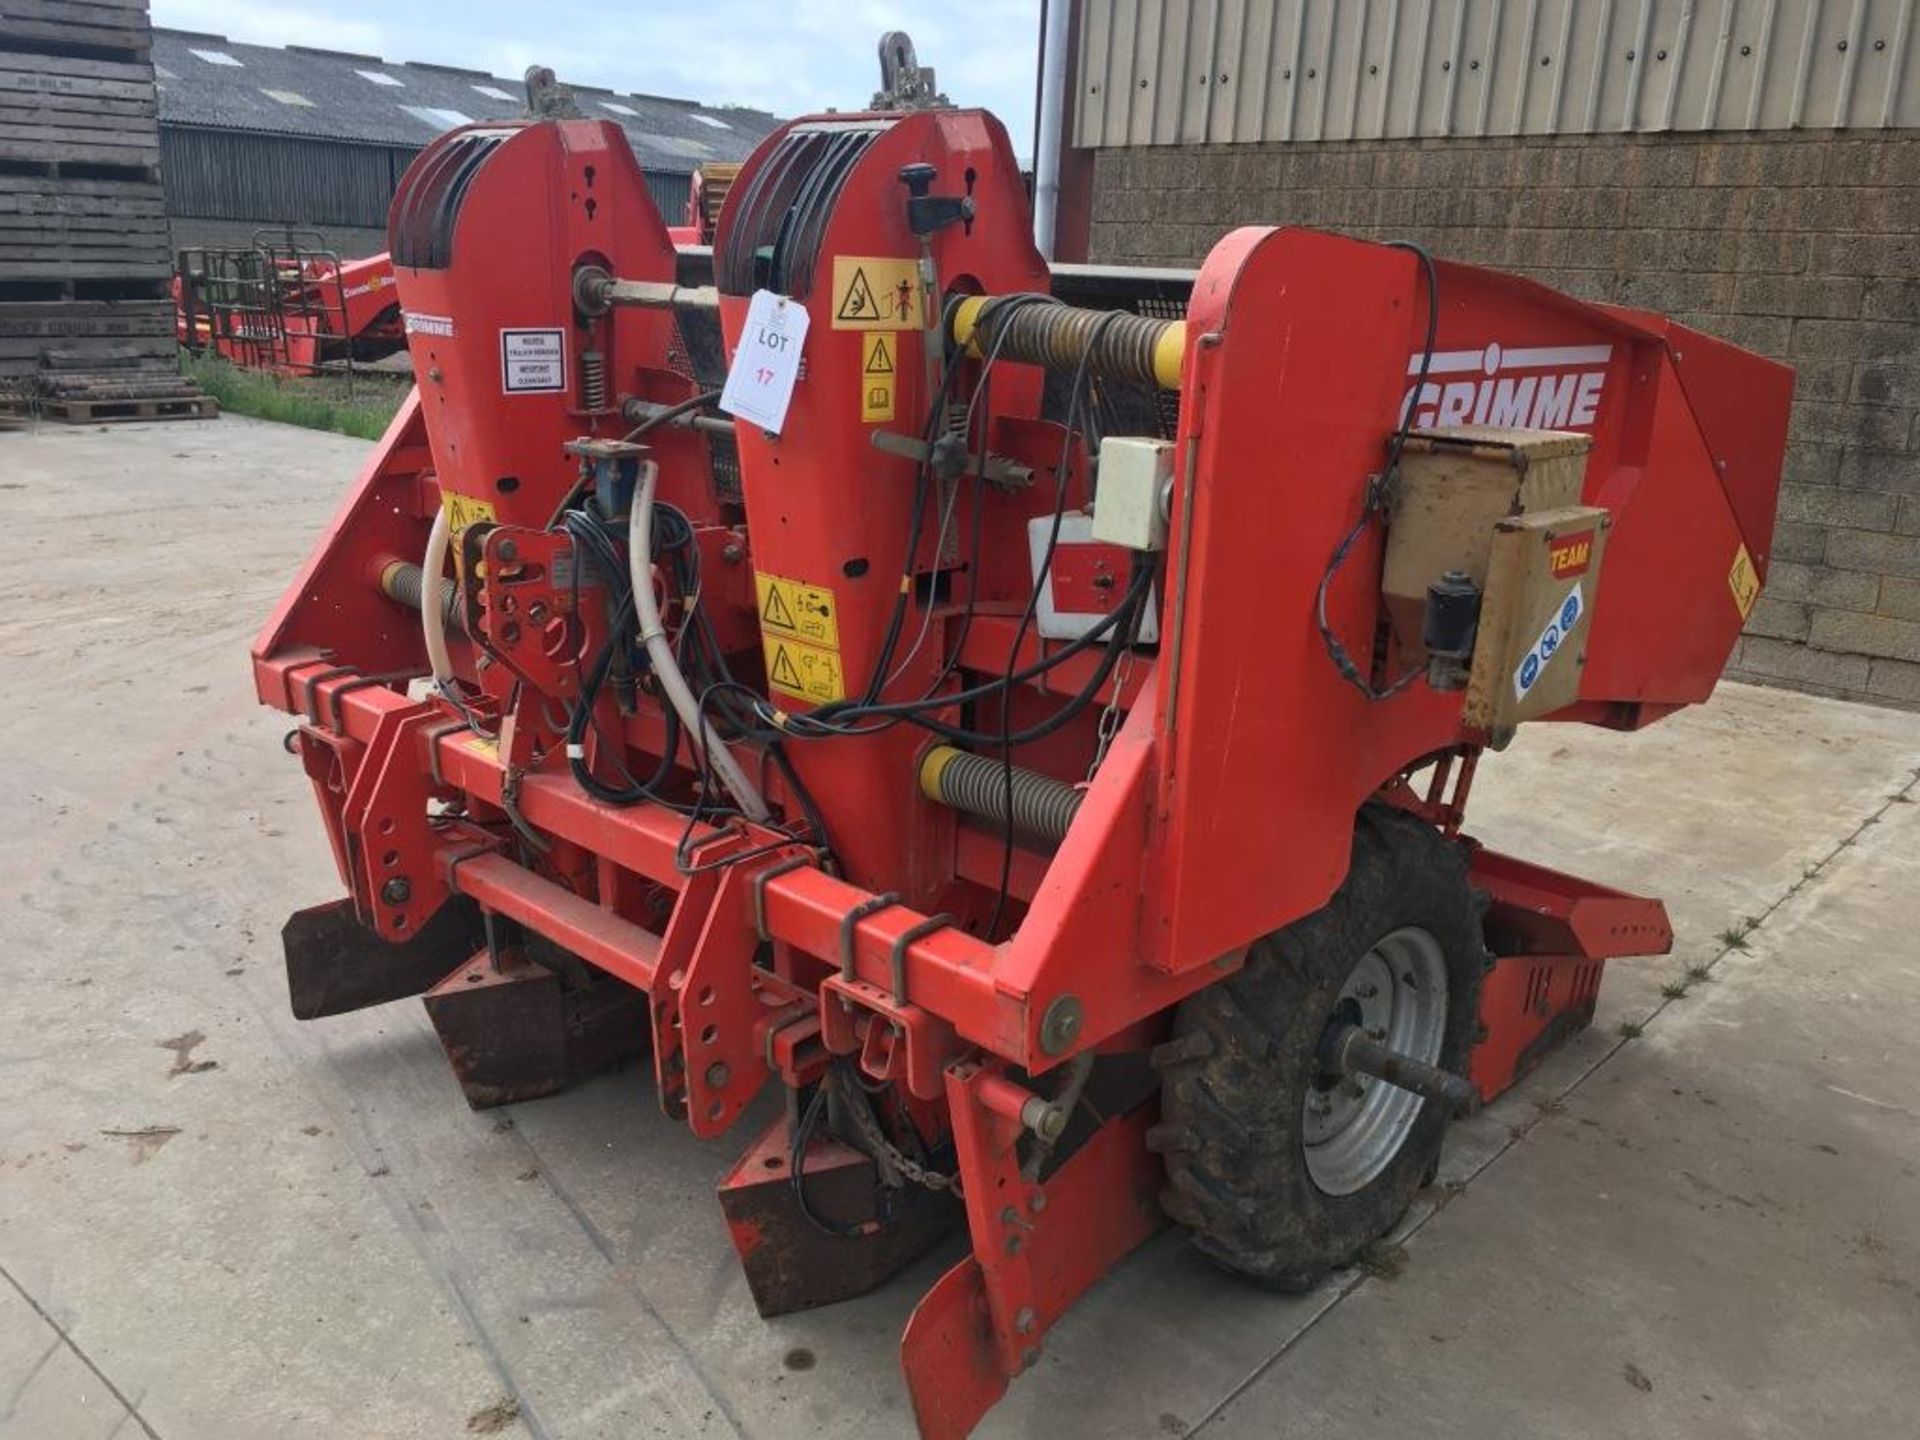 Grimme GL32B potato planter serial number: 22200278 (2001) (missing guarding) - Image 3 of 8